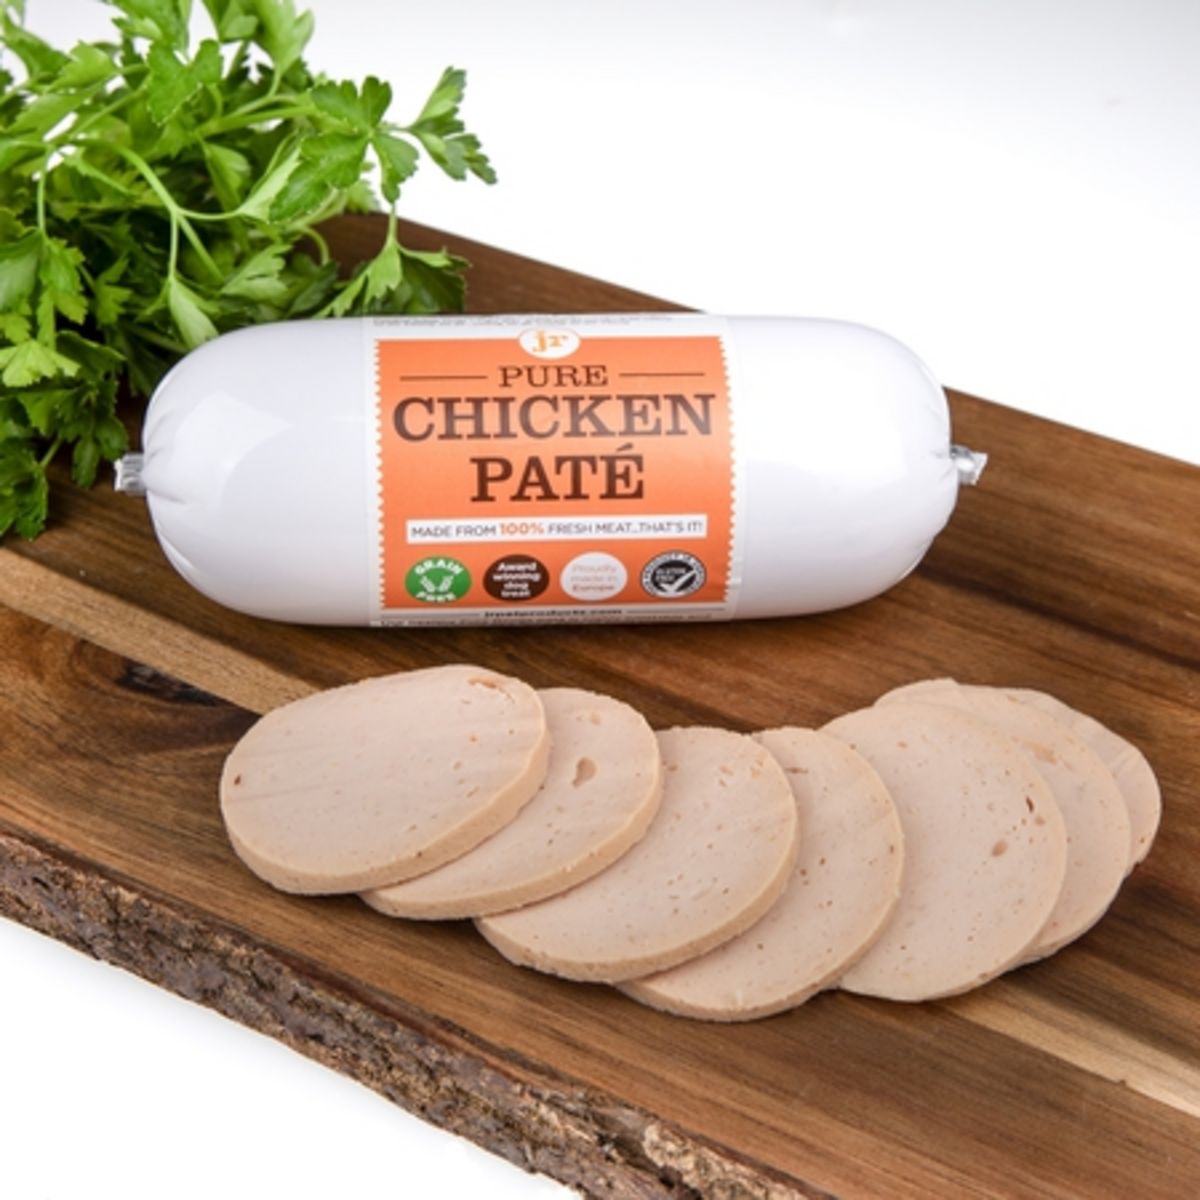 JR Pet Products - Pure Chicken Pate